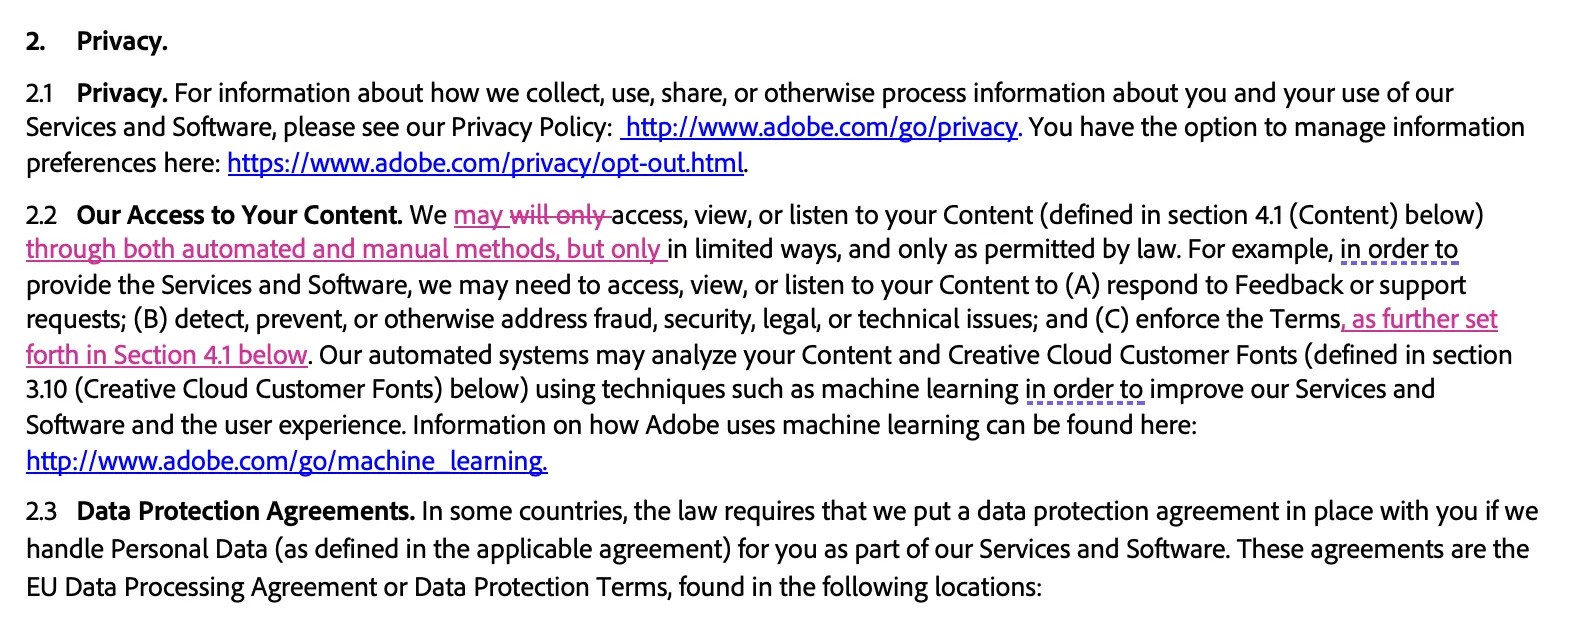 //www.adobe.com/go/privacy. You have the option to manage i information preferences here: https://www.adobe.com/privacy/opt-out.html. 2.2 Our Access to Your Content. We may will only access, view, or listen to your Content (defined in section 4.1 (Content) below) through both automated and manual methods, but only in limited ways, and only as permitted by law. For example, in order to provide the Services and Software, we may need to access, view, or listen to your Content to (A) respond to Feedback or support requests; (B) detect, prevent, or otherwise address fraud, security, legal, or technical issues; and (C) enforce the Terms, as further set forth in Section 4.1 below. Our automated systems may analyze your Content and Creative Cloud Customer Fonts (defined in section 3.10 (Creative Cloud Customer Fonts) below) using techniques such as machine learning in order to improve our Services and Software and the user experience. Information on how Adobe uses machine learning can be found here: http://www.adobe.com/go/machine learning. 2.3 Data Protection Agreements. In some countries, the law requires that we put a data protection agreement in place with you if we handle Personal Data (as defined in the applicable agreement) for you as part of our Services and Software. These agreements are the EU Data Processing Agreement or Data Protection Terms, found in the following locations.